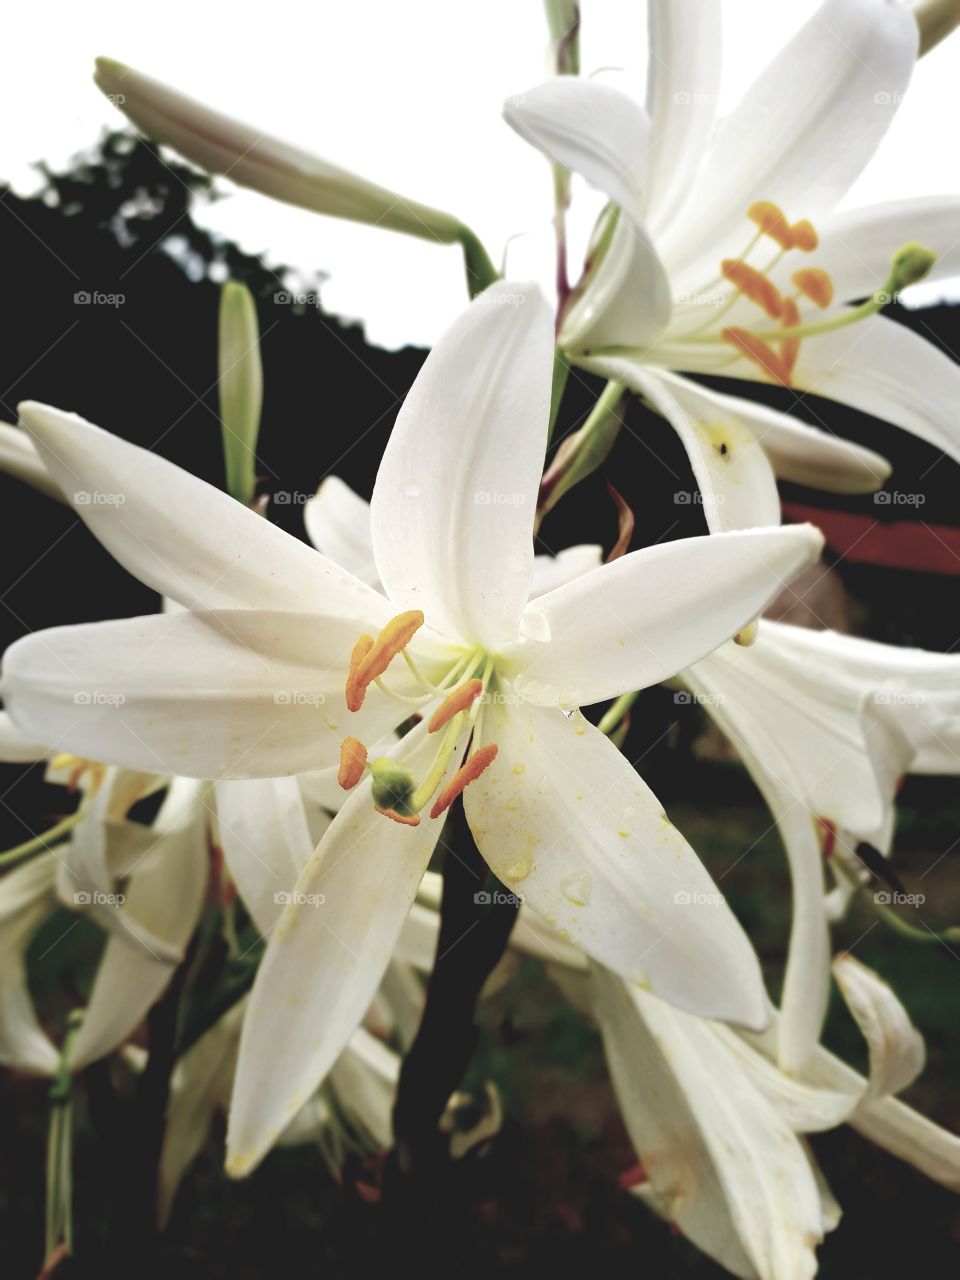 White lilies look beautiful and their smell is pleasant and refreshing